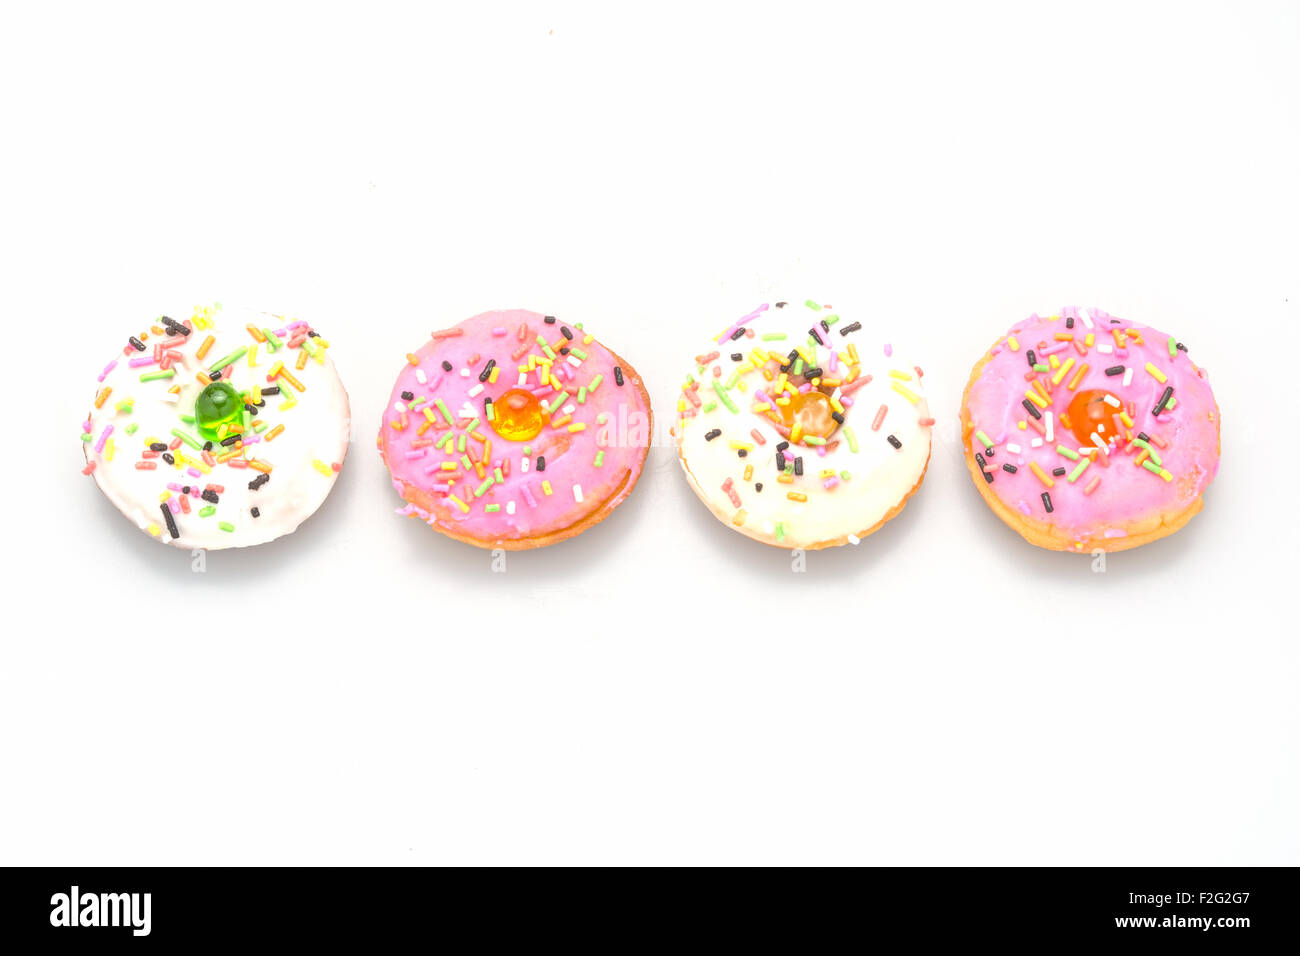 Fresh homemade colorful donuts with icing glaze delicious on white background Stock Photo